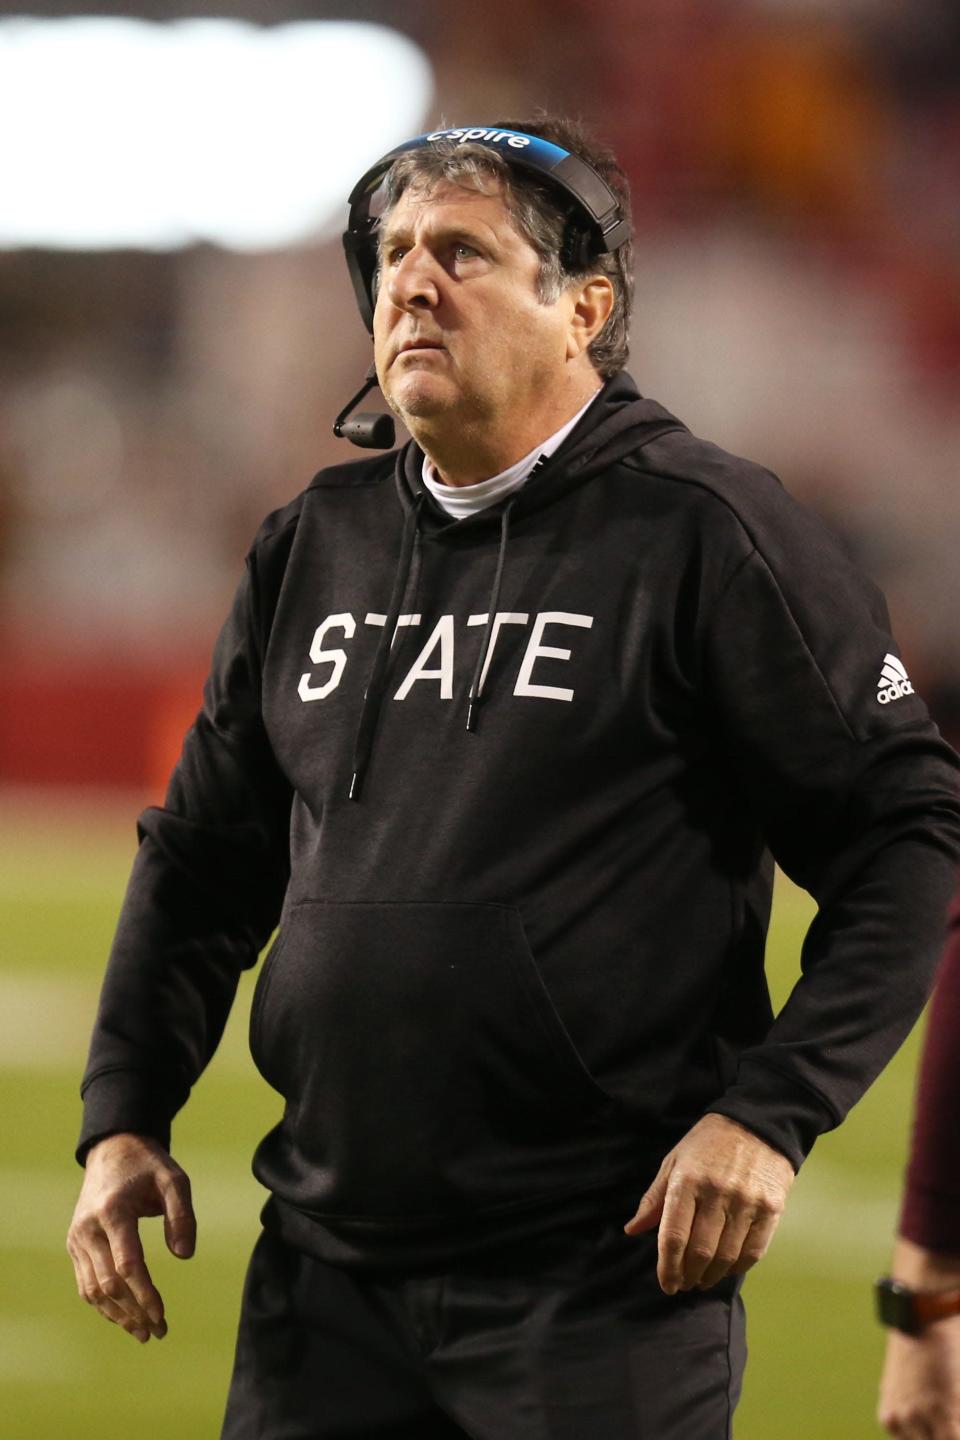 In the Liberty Bowl,  Mississippi State coach Mike Leach will face his former team, Texas Tech, in one of the more intriguing matchups of the bowl season.